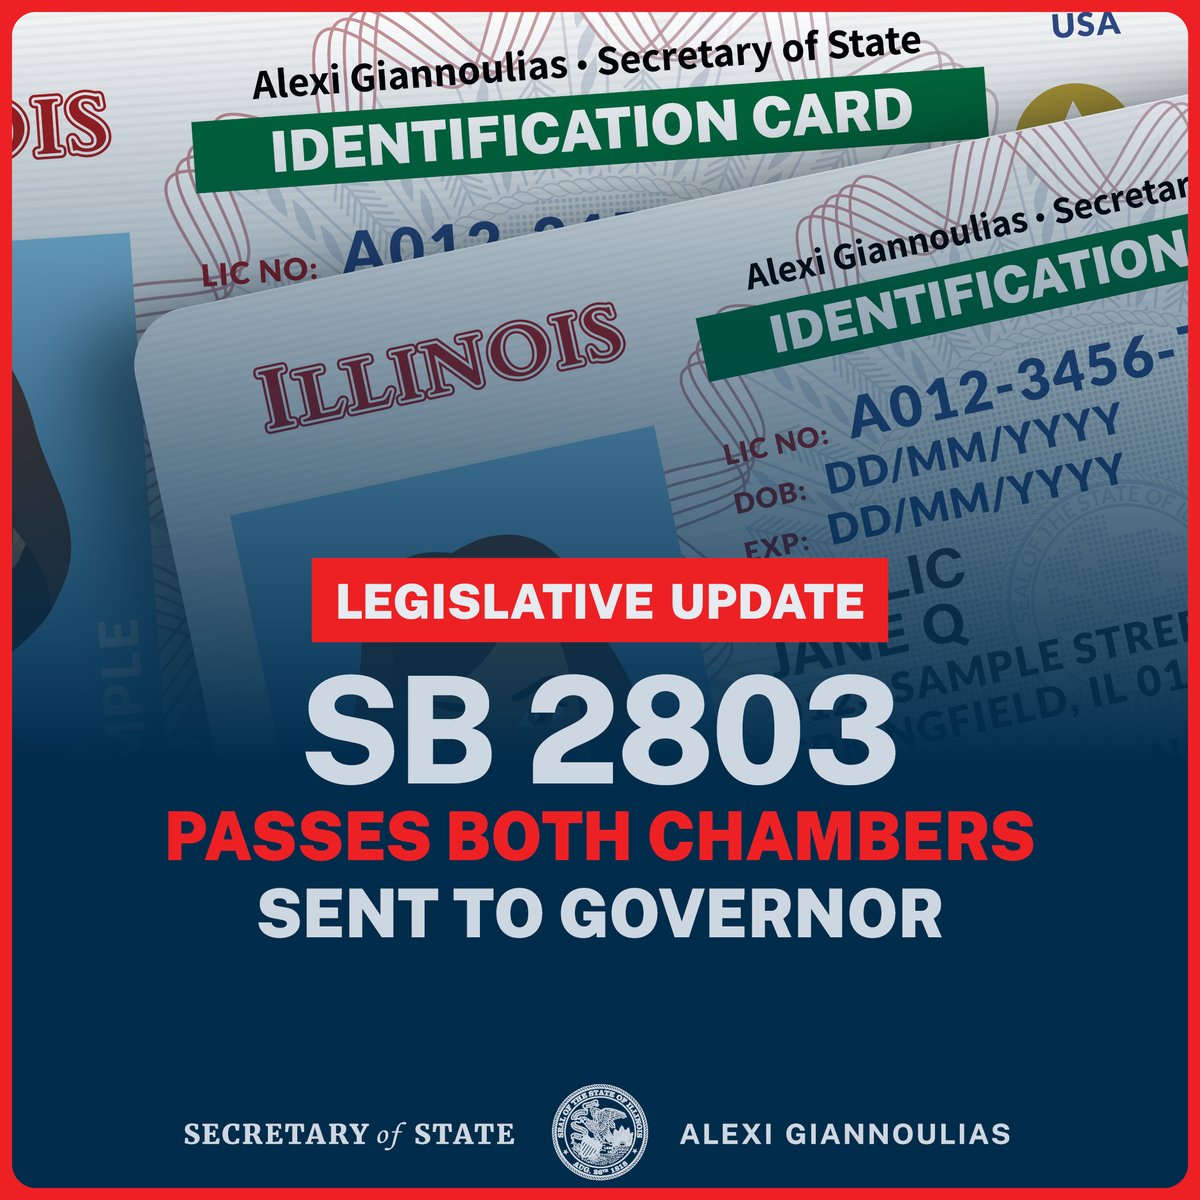 🚨 LEGISLATIVE UPDATE: The ID Card Accessibility Measure – or Senate Bill 2803 – has PASSED BOTH CHAMBERS and will be sent to the governor! Proposed legislation expands efforts to provide government issued ID cards at no cost to individuals being released from custody.